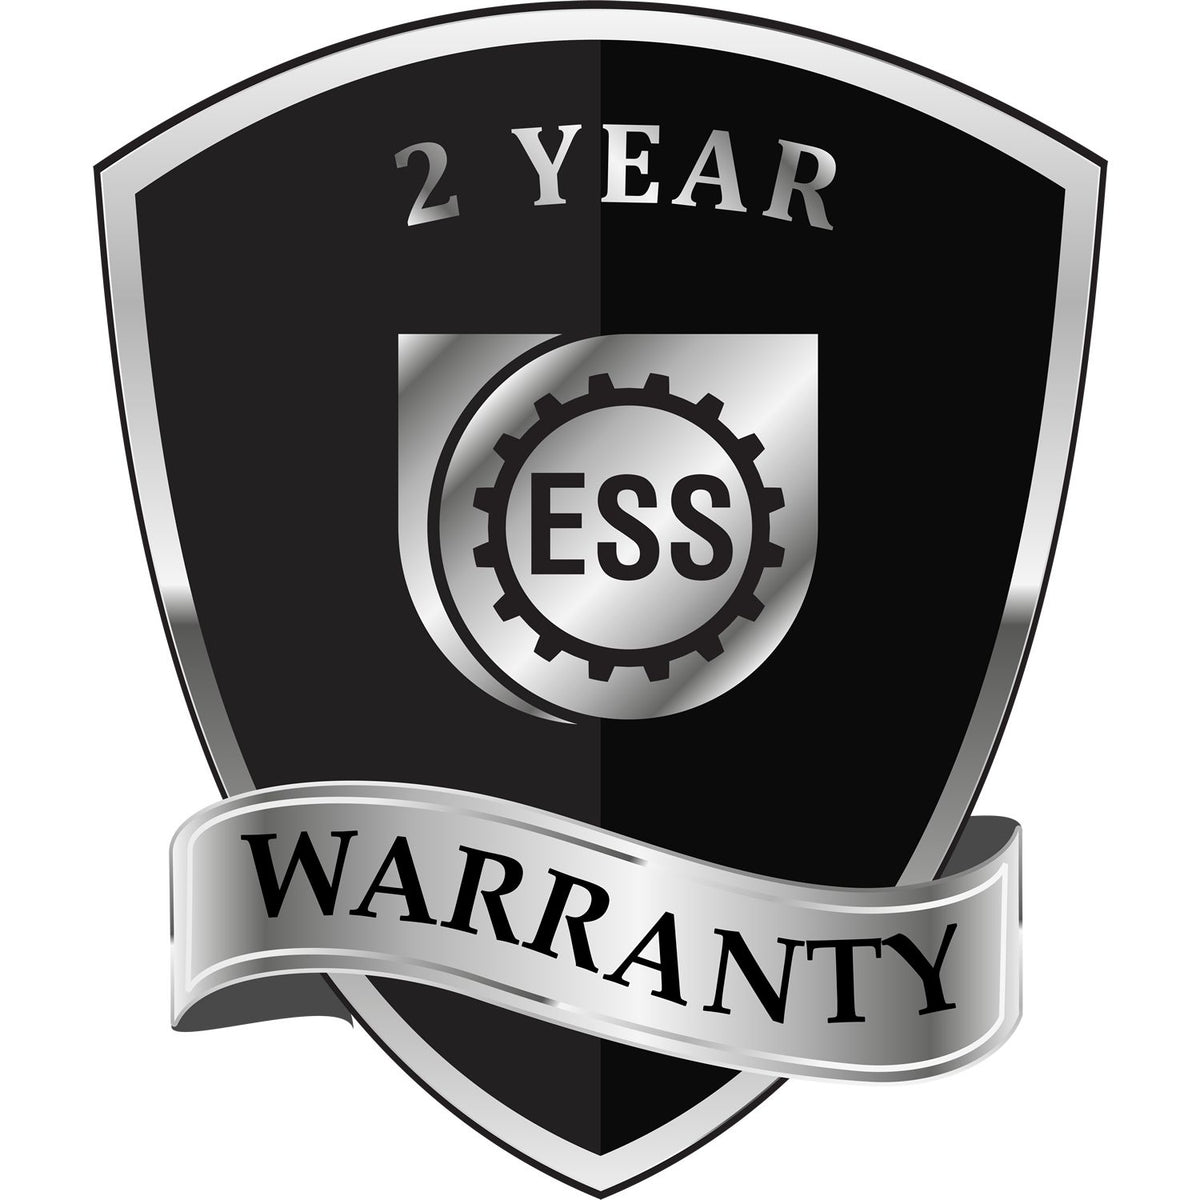 A black and silver badge or emblem showing warranty information for the Gift Oklahoma Architect Seal